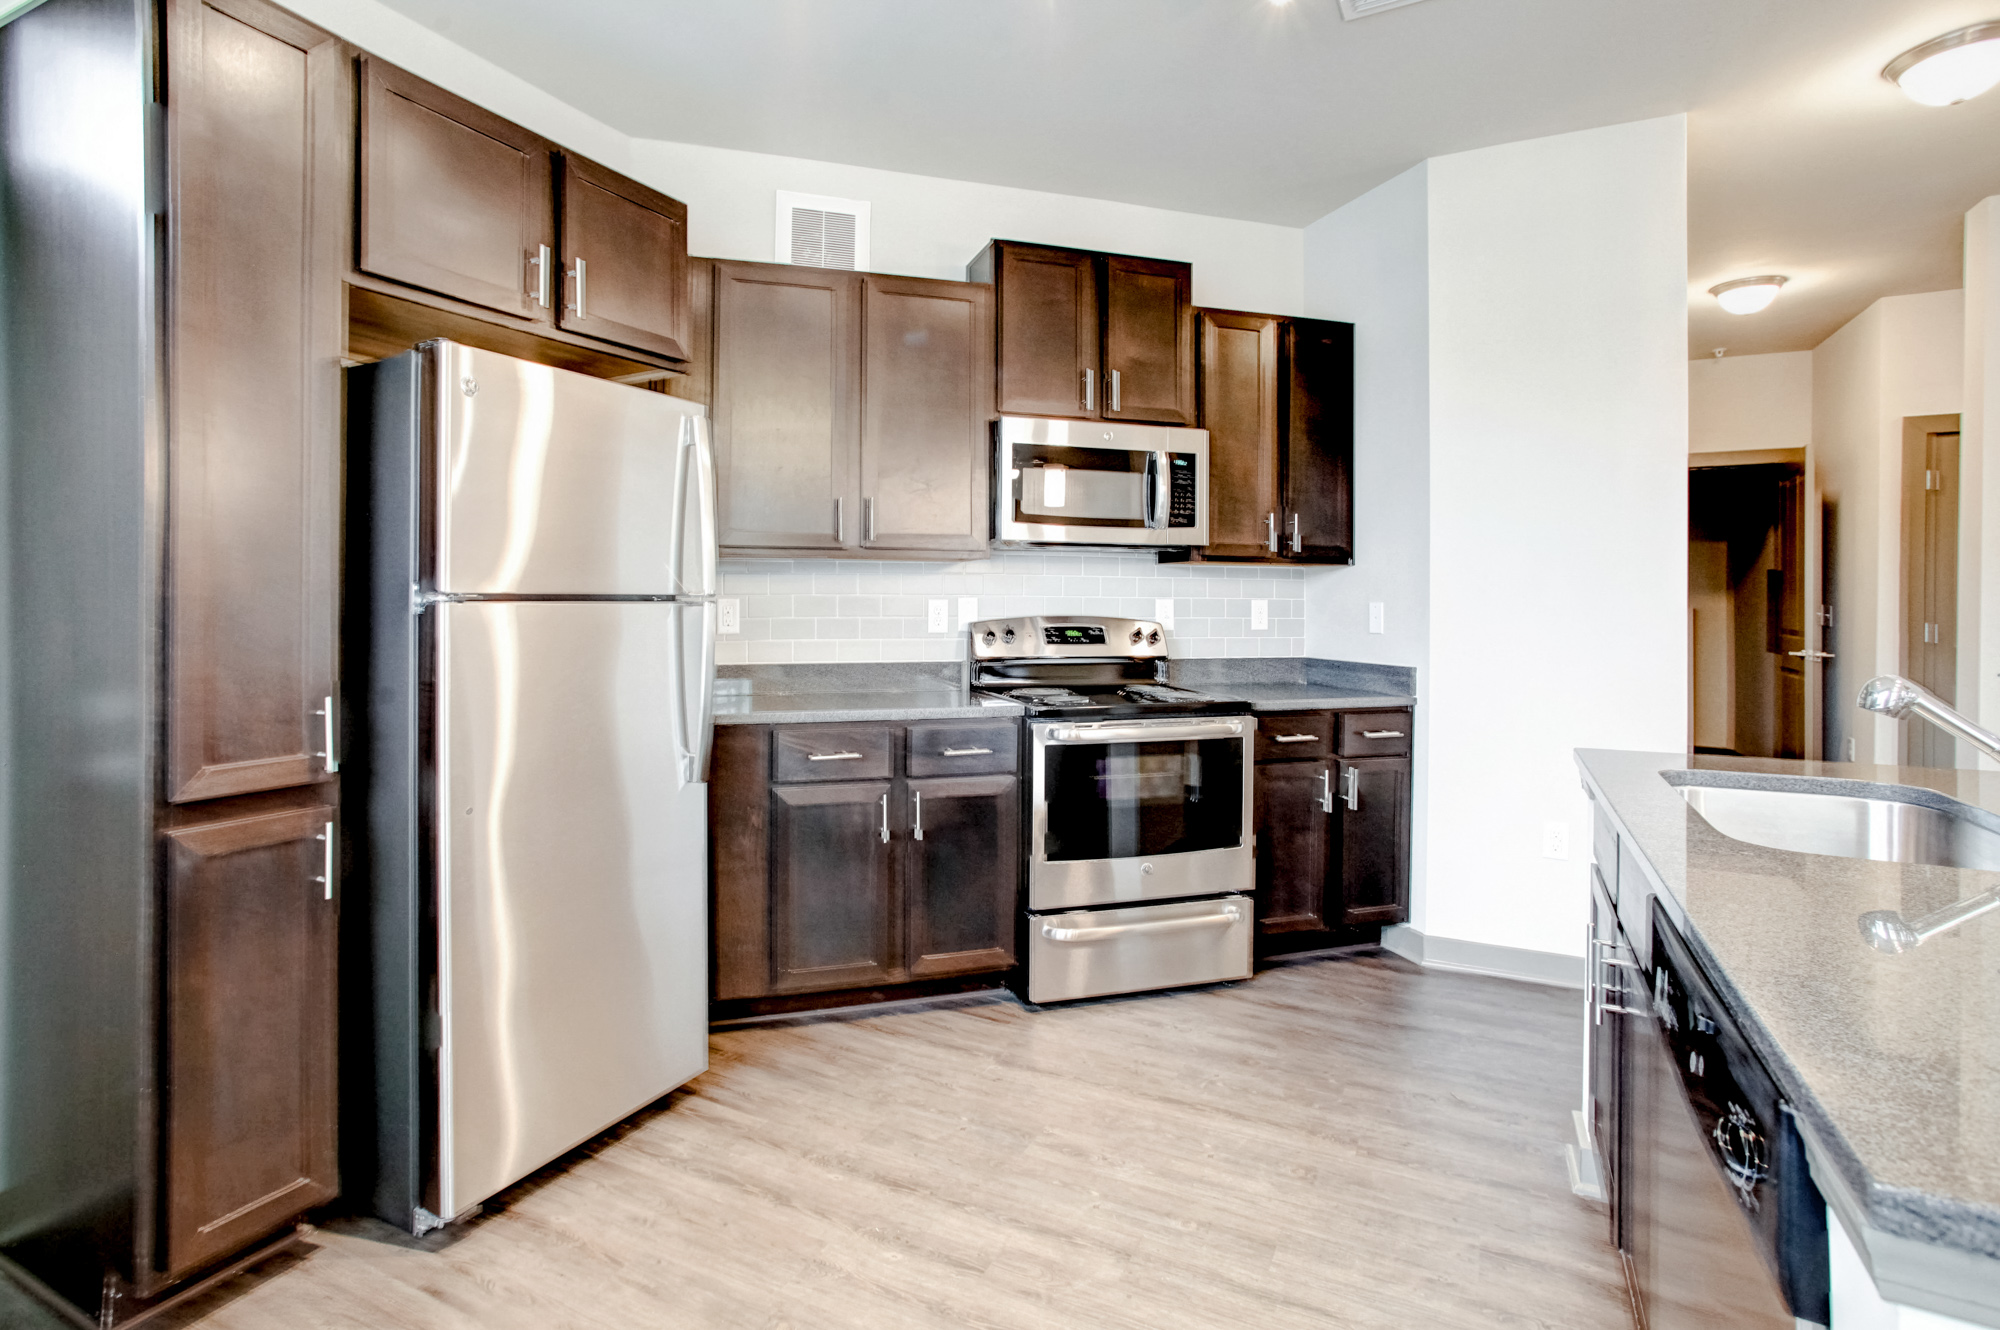 Stainless steel appliances sit inside a wood cabinets with wood-plank flooring on the ground.